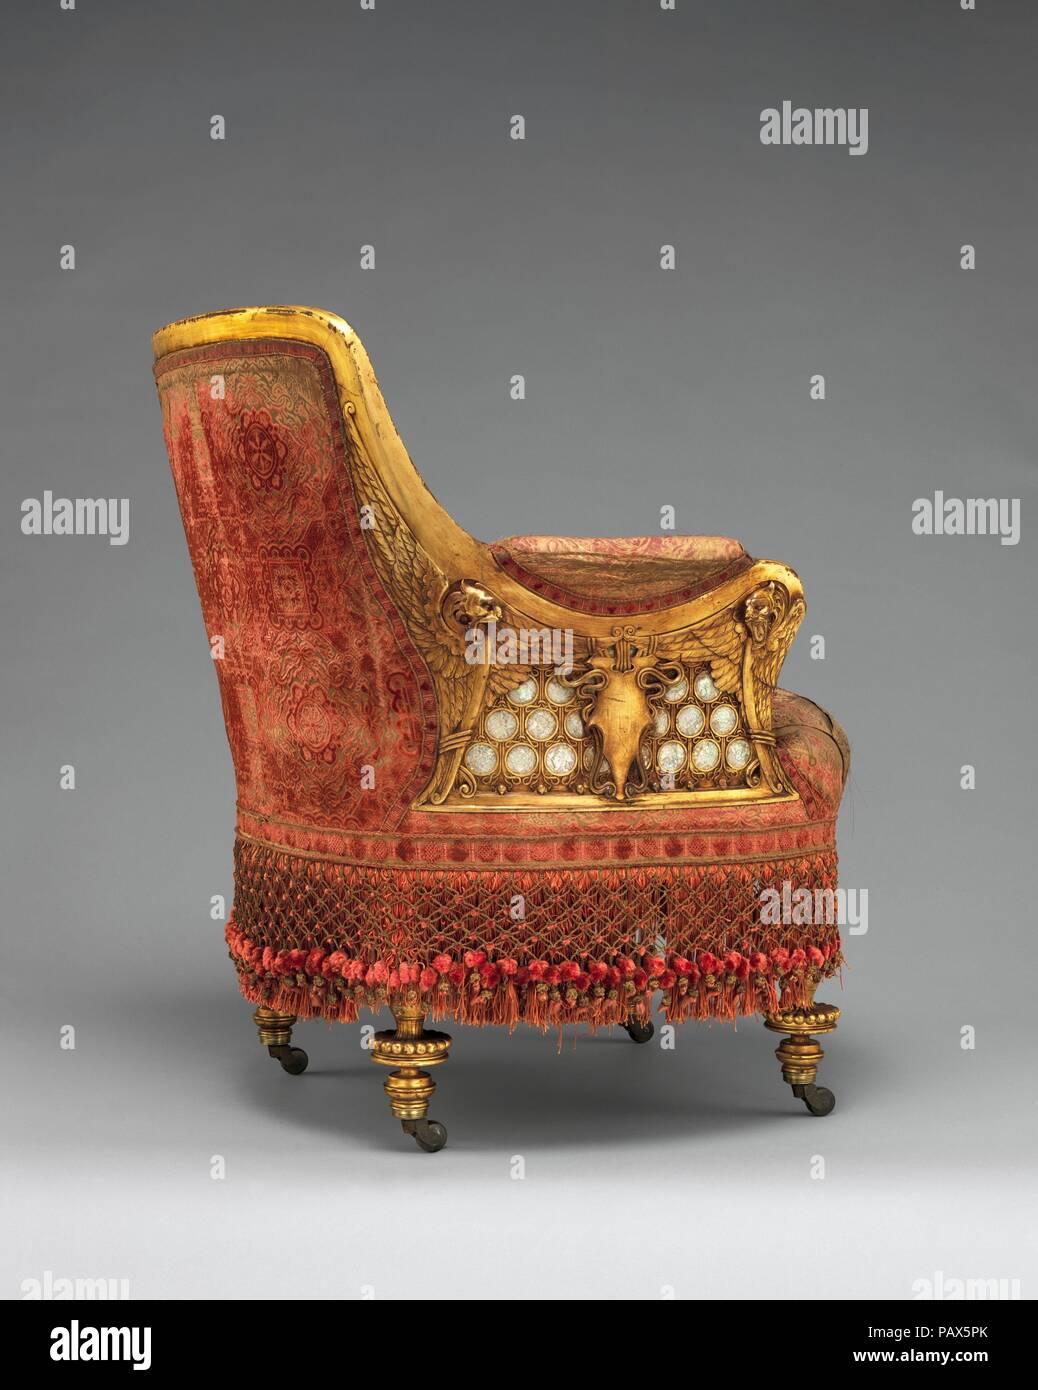 Armchair. Culture: American. Dimensions: 33 1/2 x 27 x 28 in. (85.1 x 68.6 x 71.1 cm). Maker: Herter Brothers (German, active New York, 1864-1906). Date: 1881-82.  William H. Vanderbilt, son of Cornelius 'Commodore' Vanderbilt, inherited a vast fortune and a lucrative transport business, which he expanded exponentially, becoming one of the wealthiest men in America. In 1879, to mark his elevated social and economic status, he built a mansion that spanned an entire city block on Fifth Avenue, between Fifty-First and Fifty-Second Streets. He commissioned Herter Brothers, one of the premier cabin Stock Photo